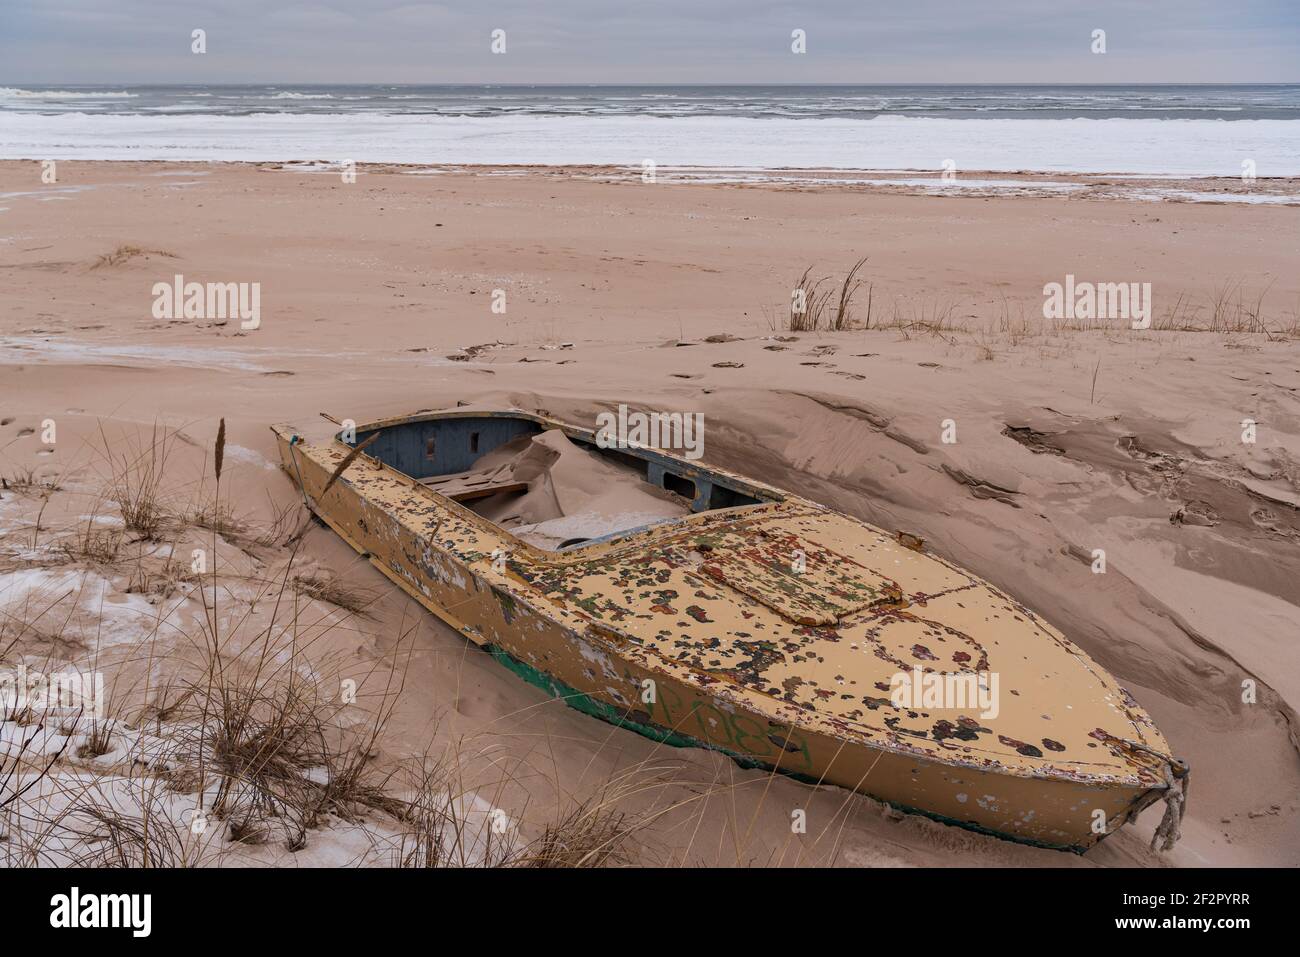 the boat is blown ashore in the sea sand close to the shoreline and the boat is made of yellow aluminum which has already peeled off in places Stock Photo